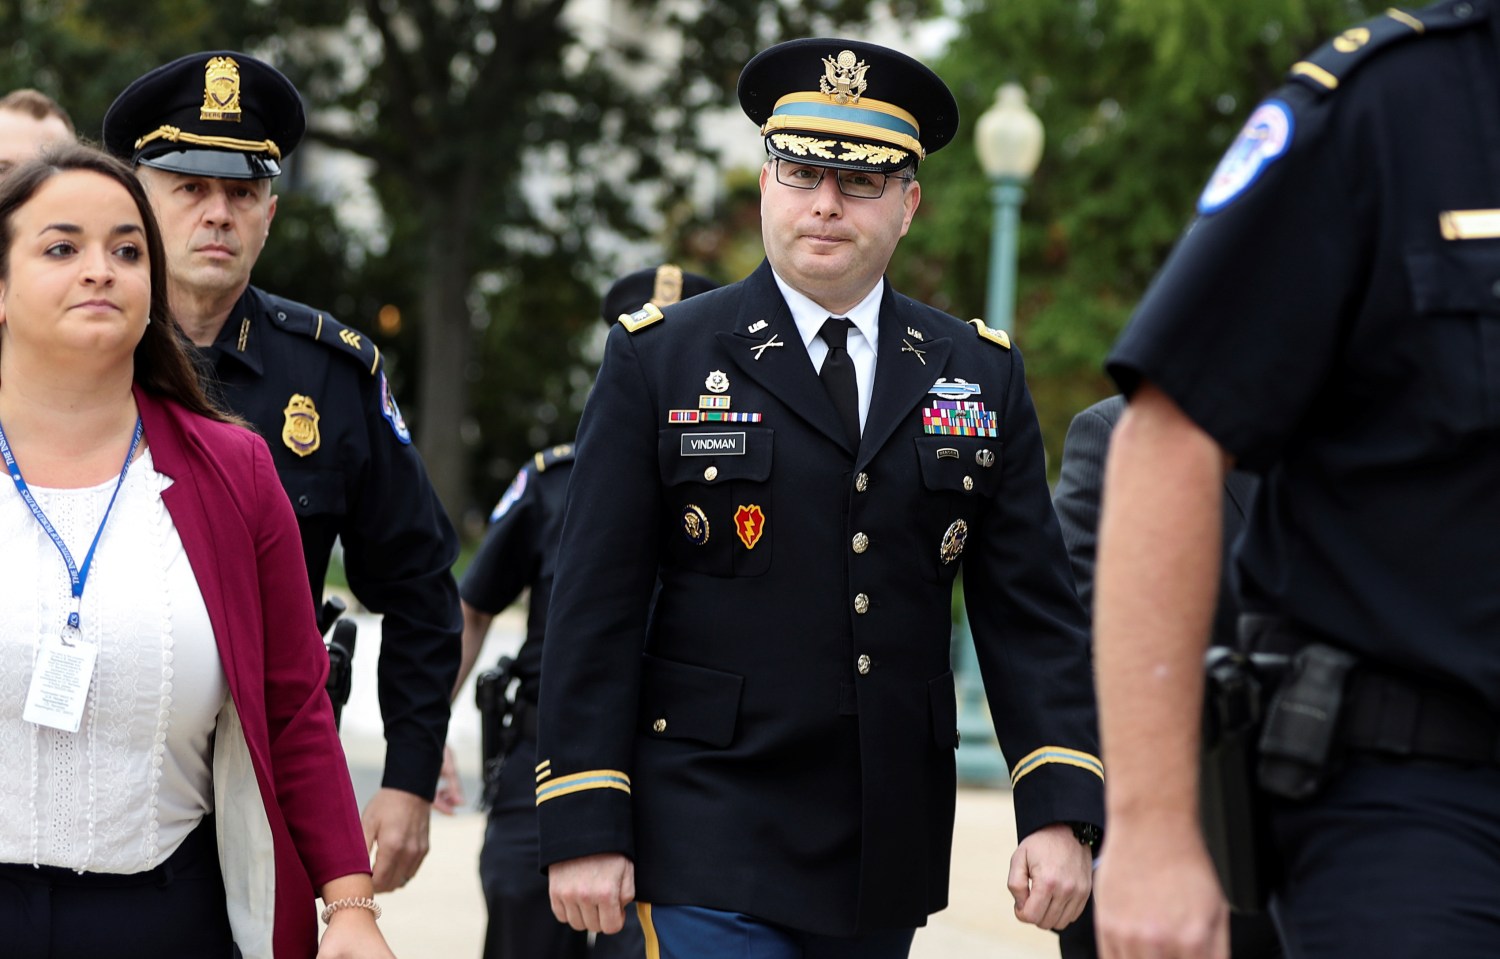 Lt. Col. Alexander Vindman, director for European Affairs at the National Security Council, arrives to testify as part of the U.S. House of Representatives impeachment inquiry into U.S. President Trump led by the House Intelligence, House Foreign Affairs and House Oversight and Reform Committees on Capitol Hill in Washington, U.S., October 29, 2019. REUTERS/Siphiwe Sibeko - RC1838F82860